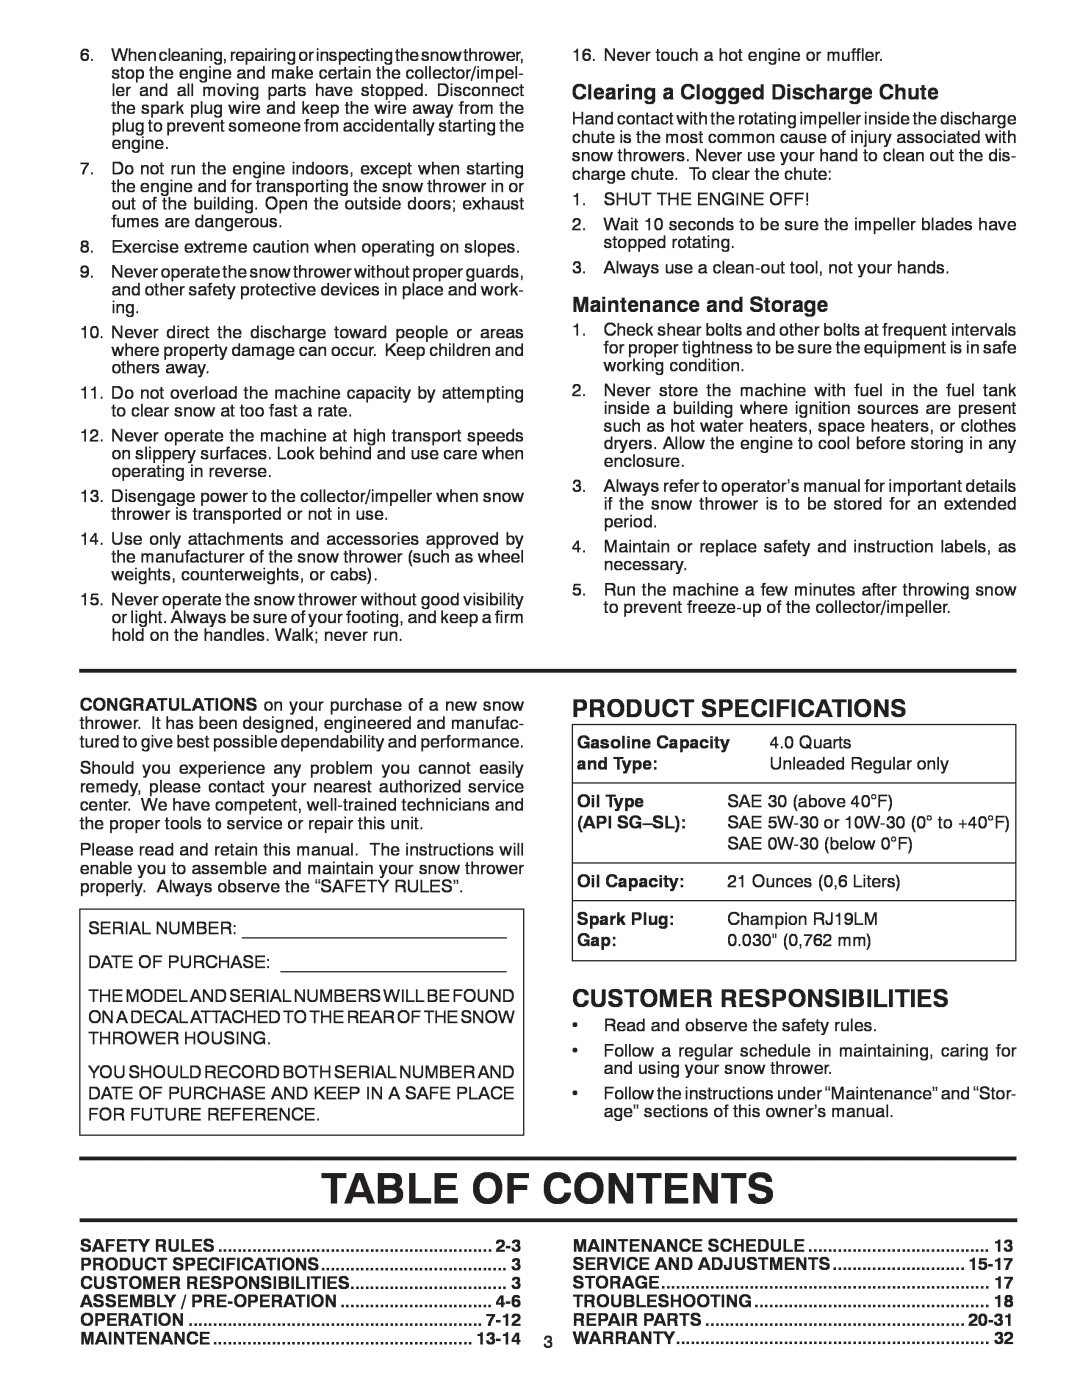 Poulan 96192001801 Table Of Contents, Product Specifications, Customer Responsibilities, Maintenance and Storage, and Type 